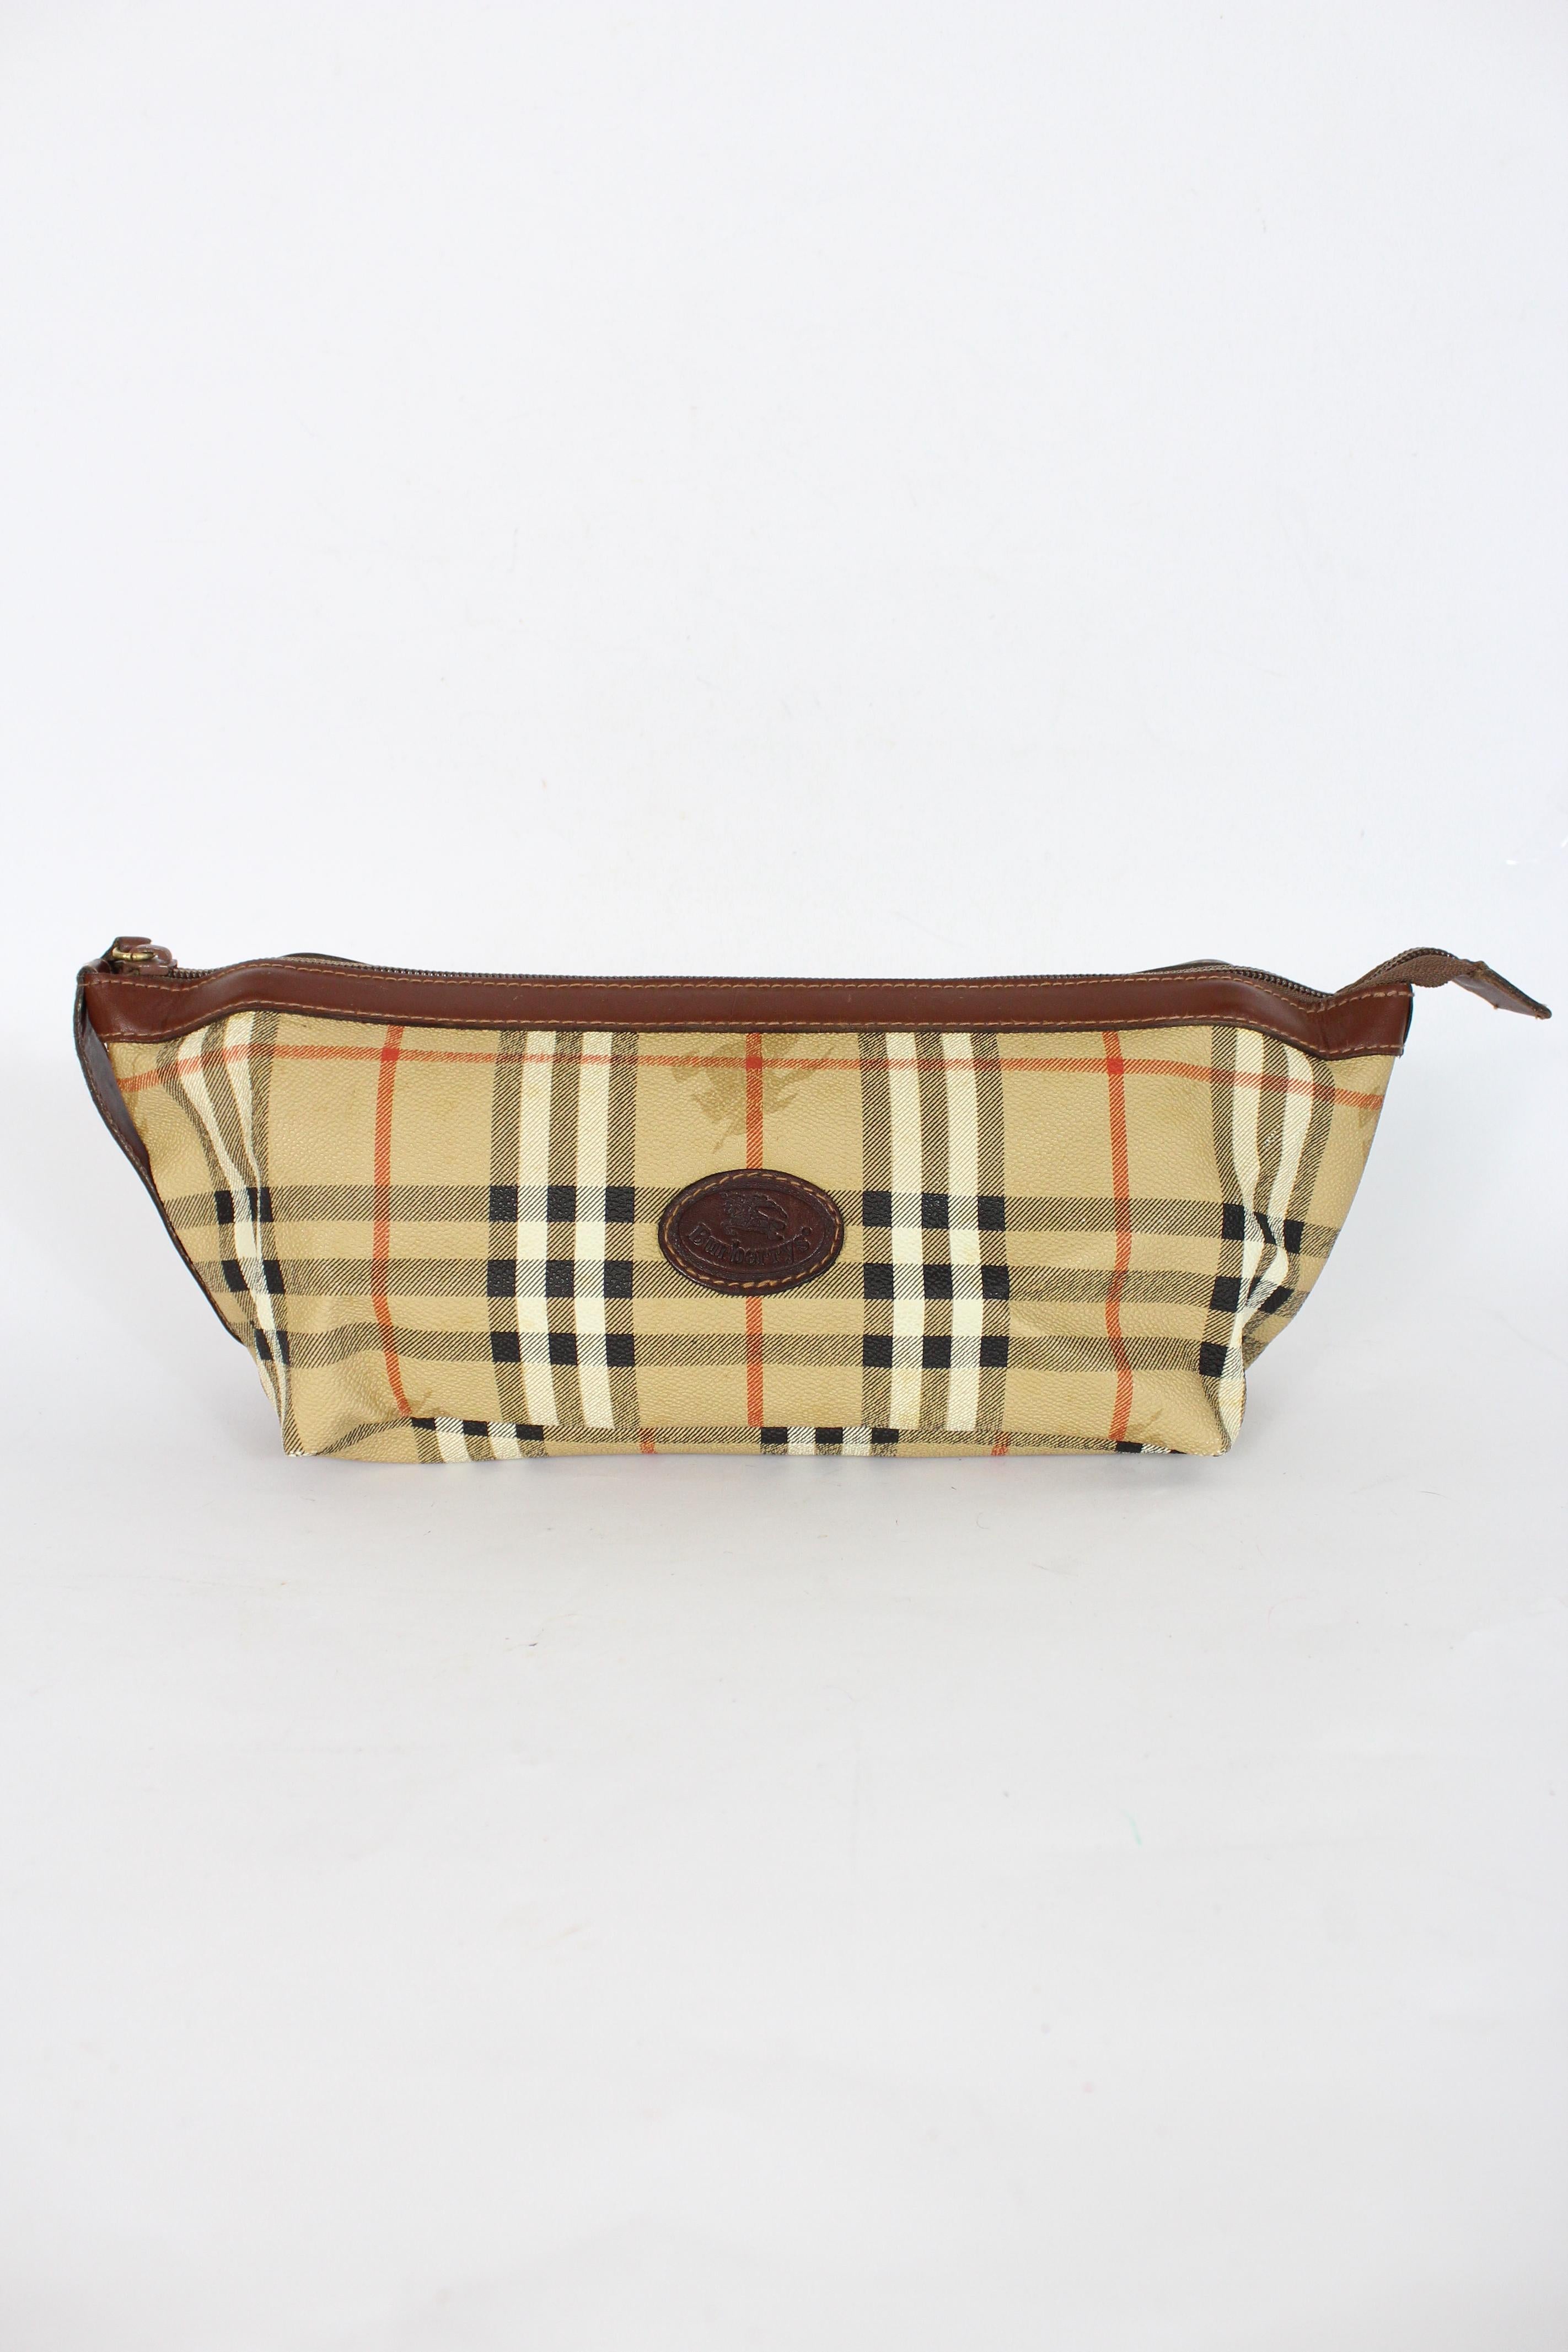 Burberry 80s vintage travel clutch bag. Bag for objects, beige color, tartan pattern. Zip closure, canvas and leather fabric. Made in Italy.

Condition: Excellent

Item used few times, it remains in its excellent condition. There are no visible